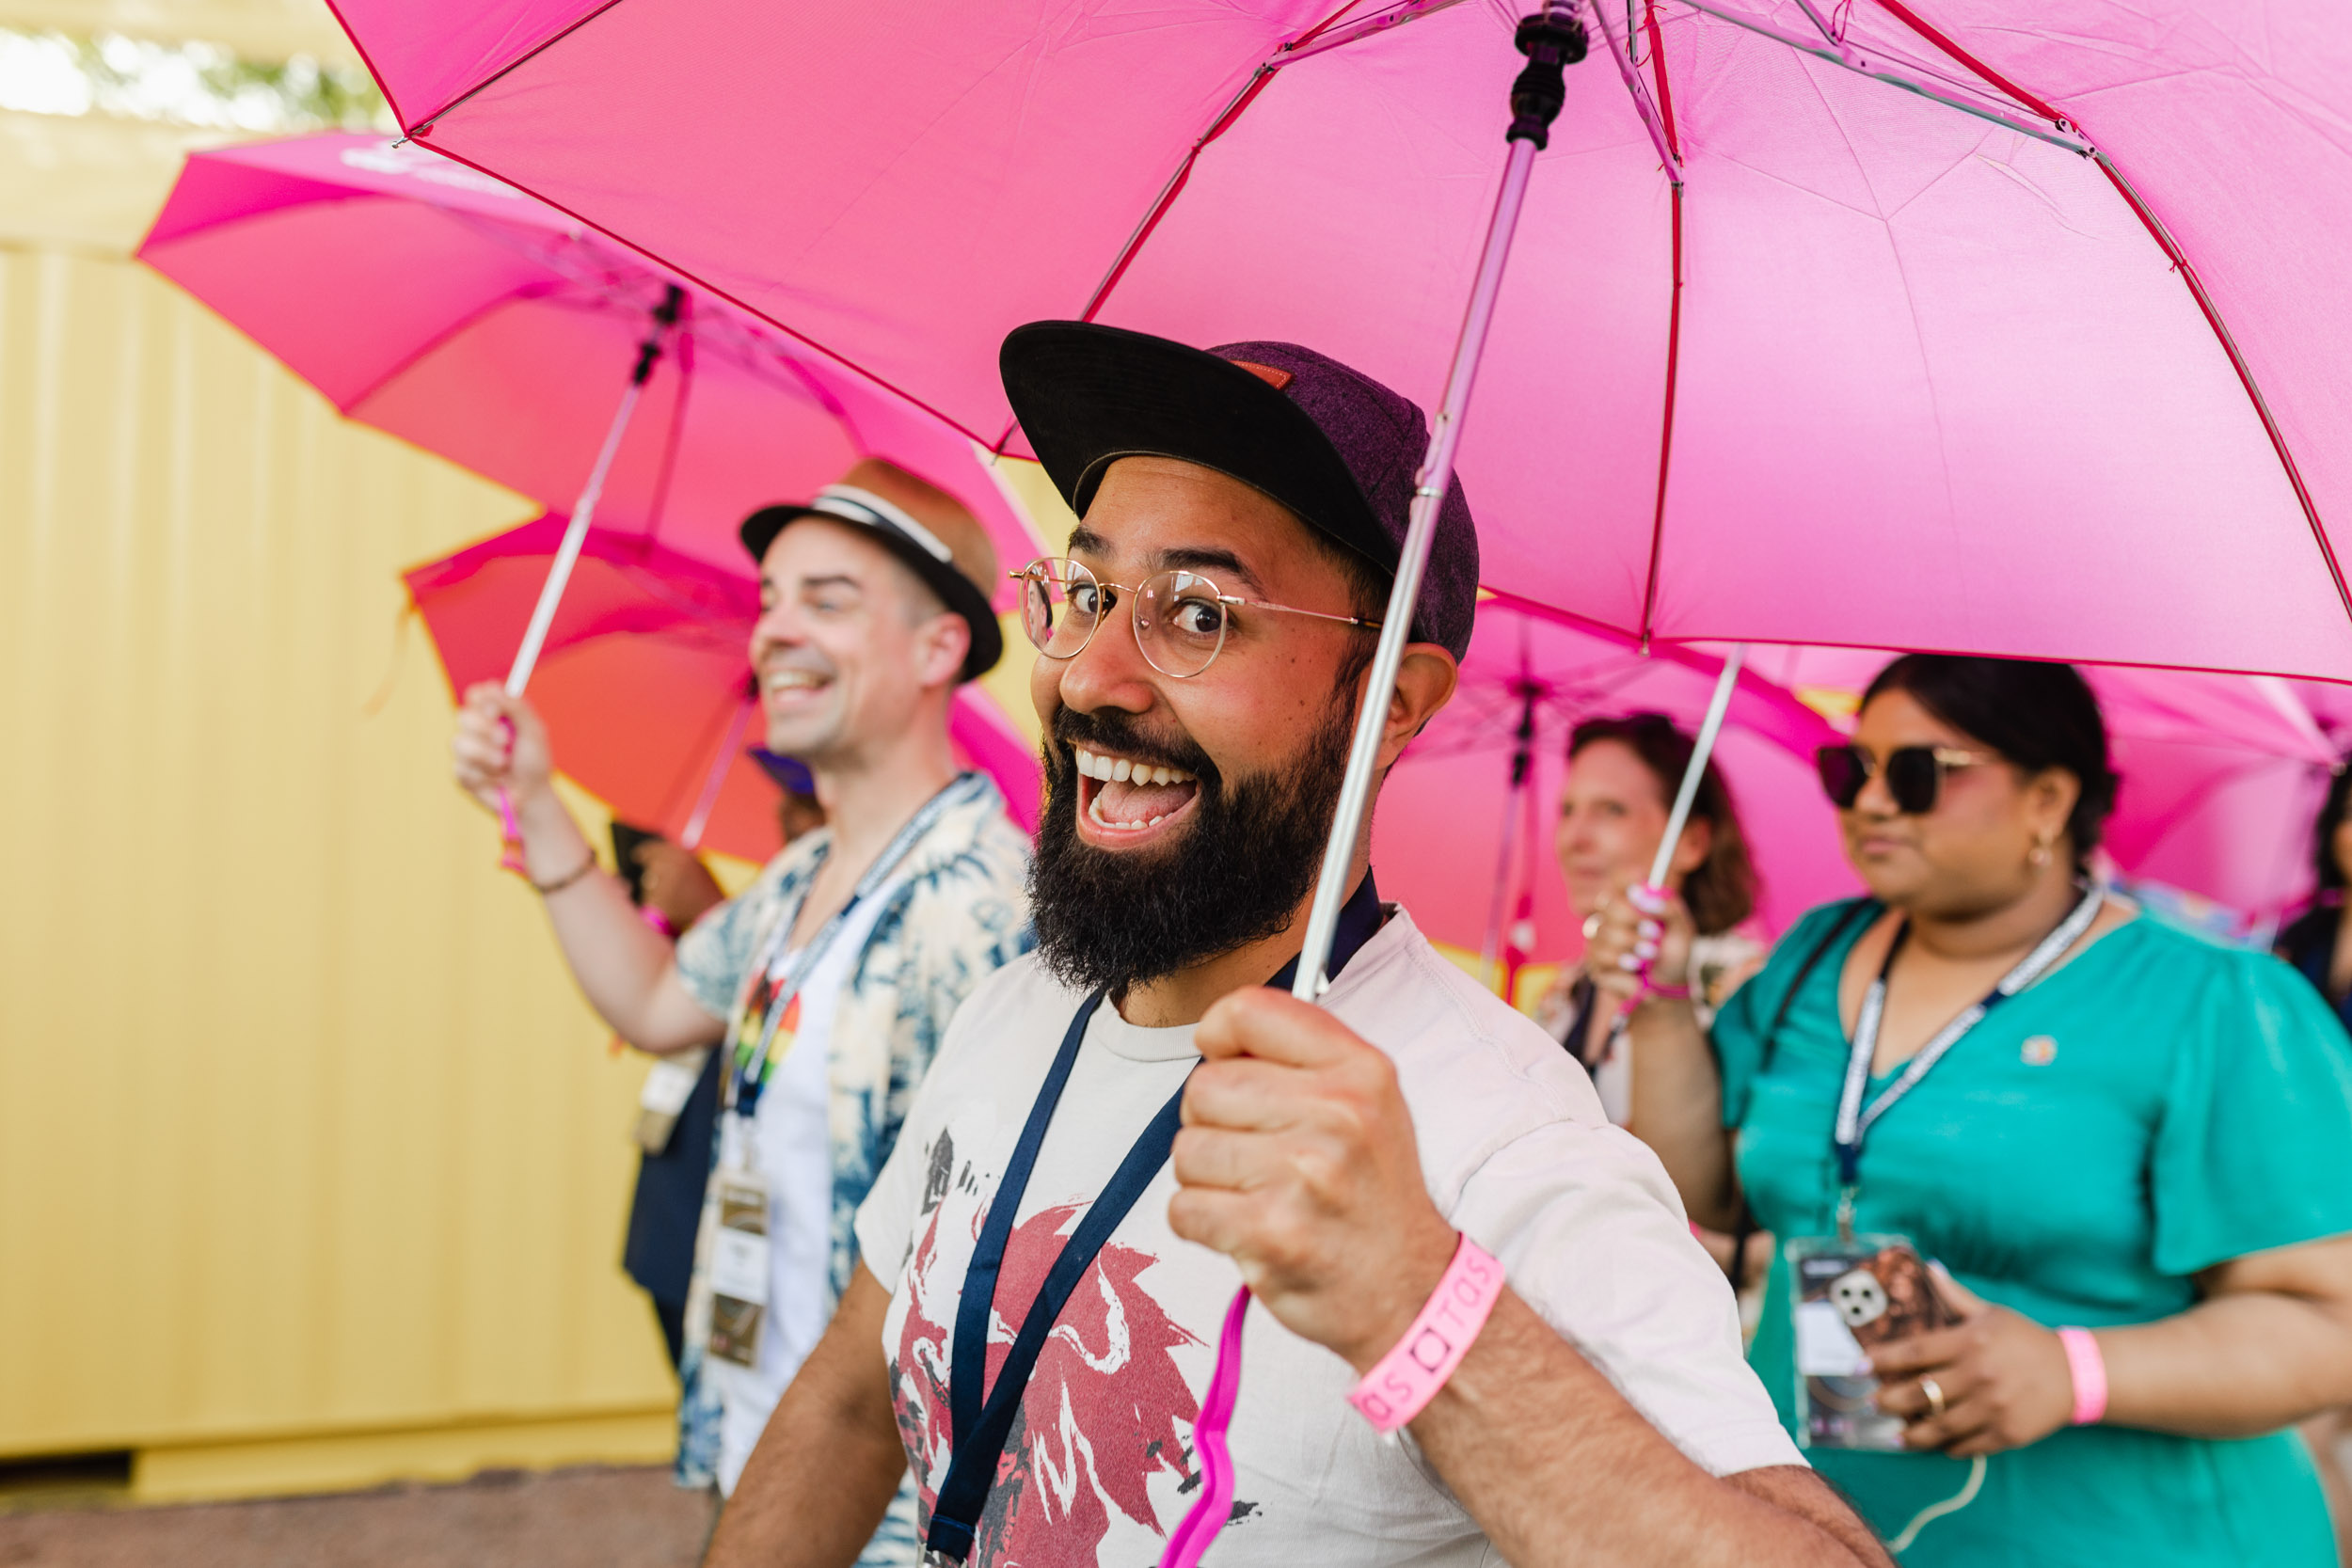 Conference attendees holding pink umbrellas.